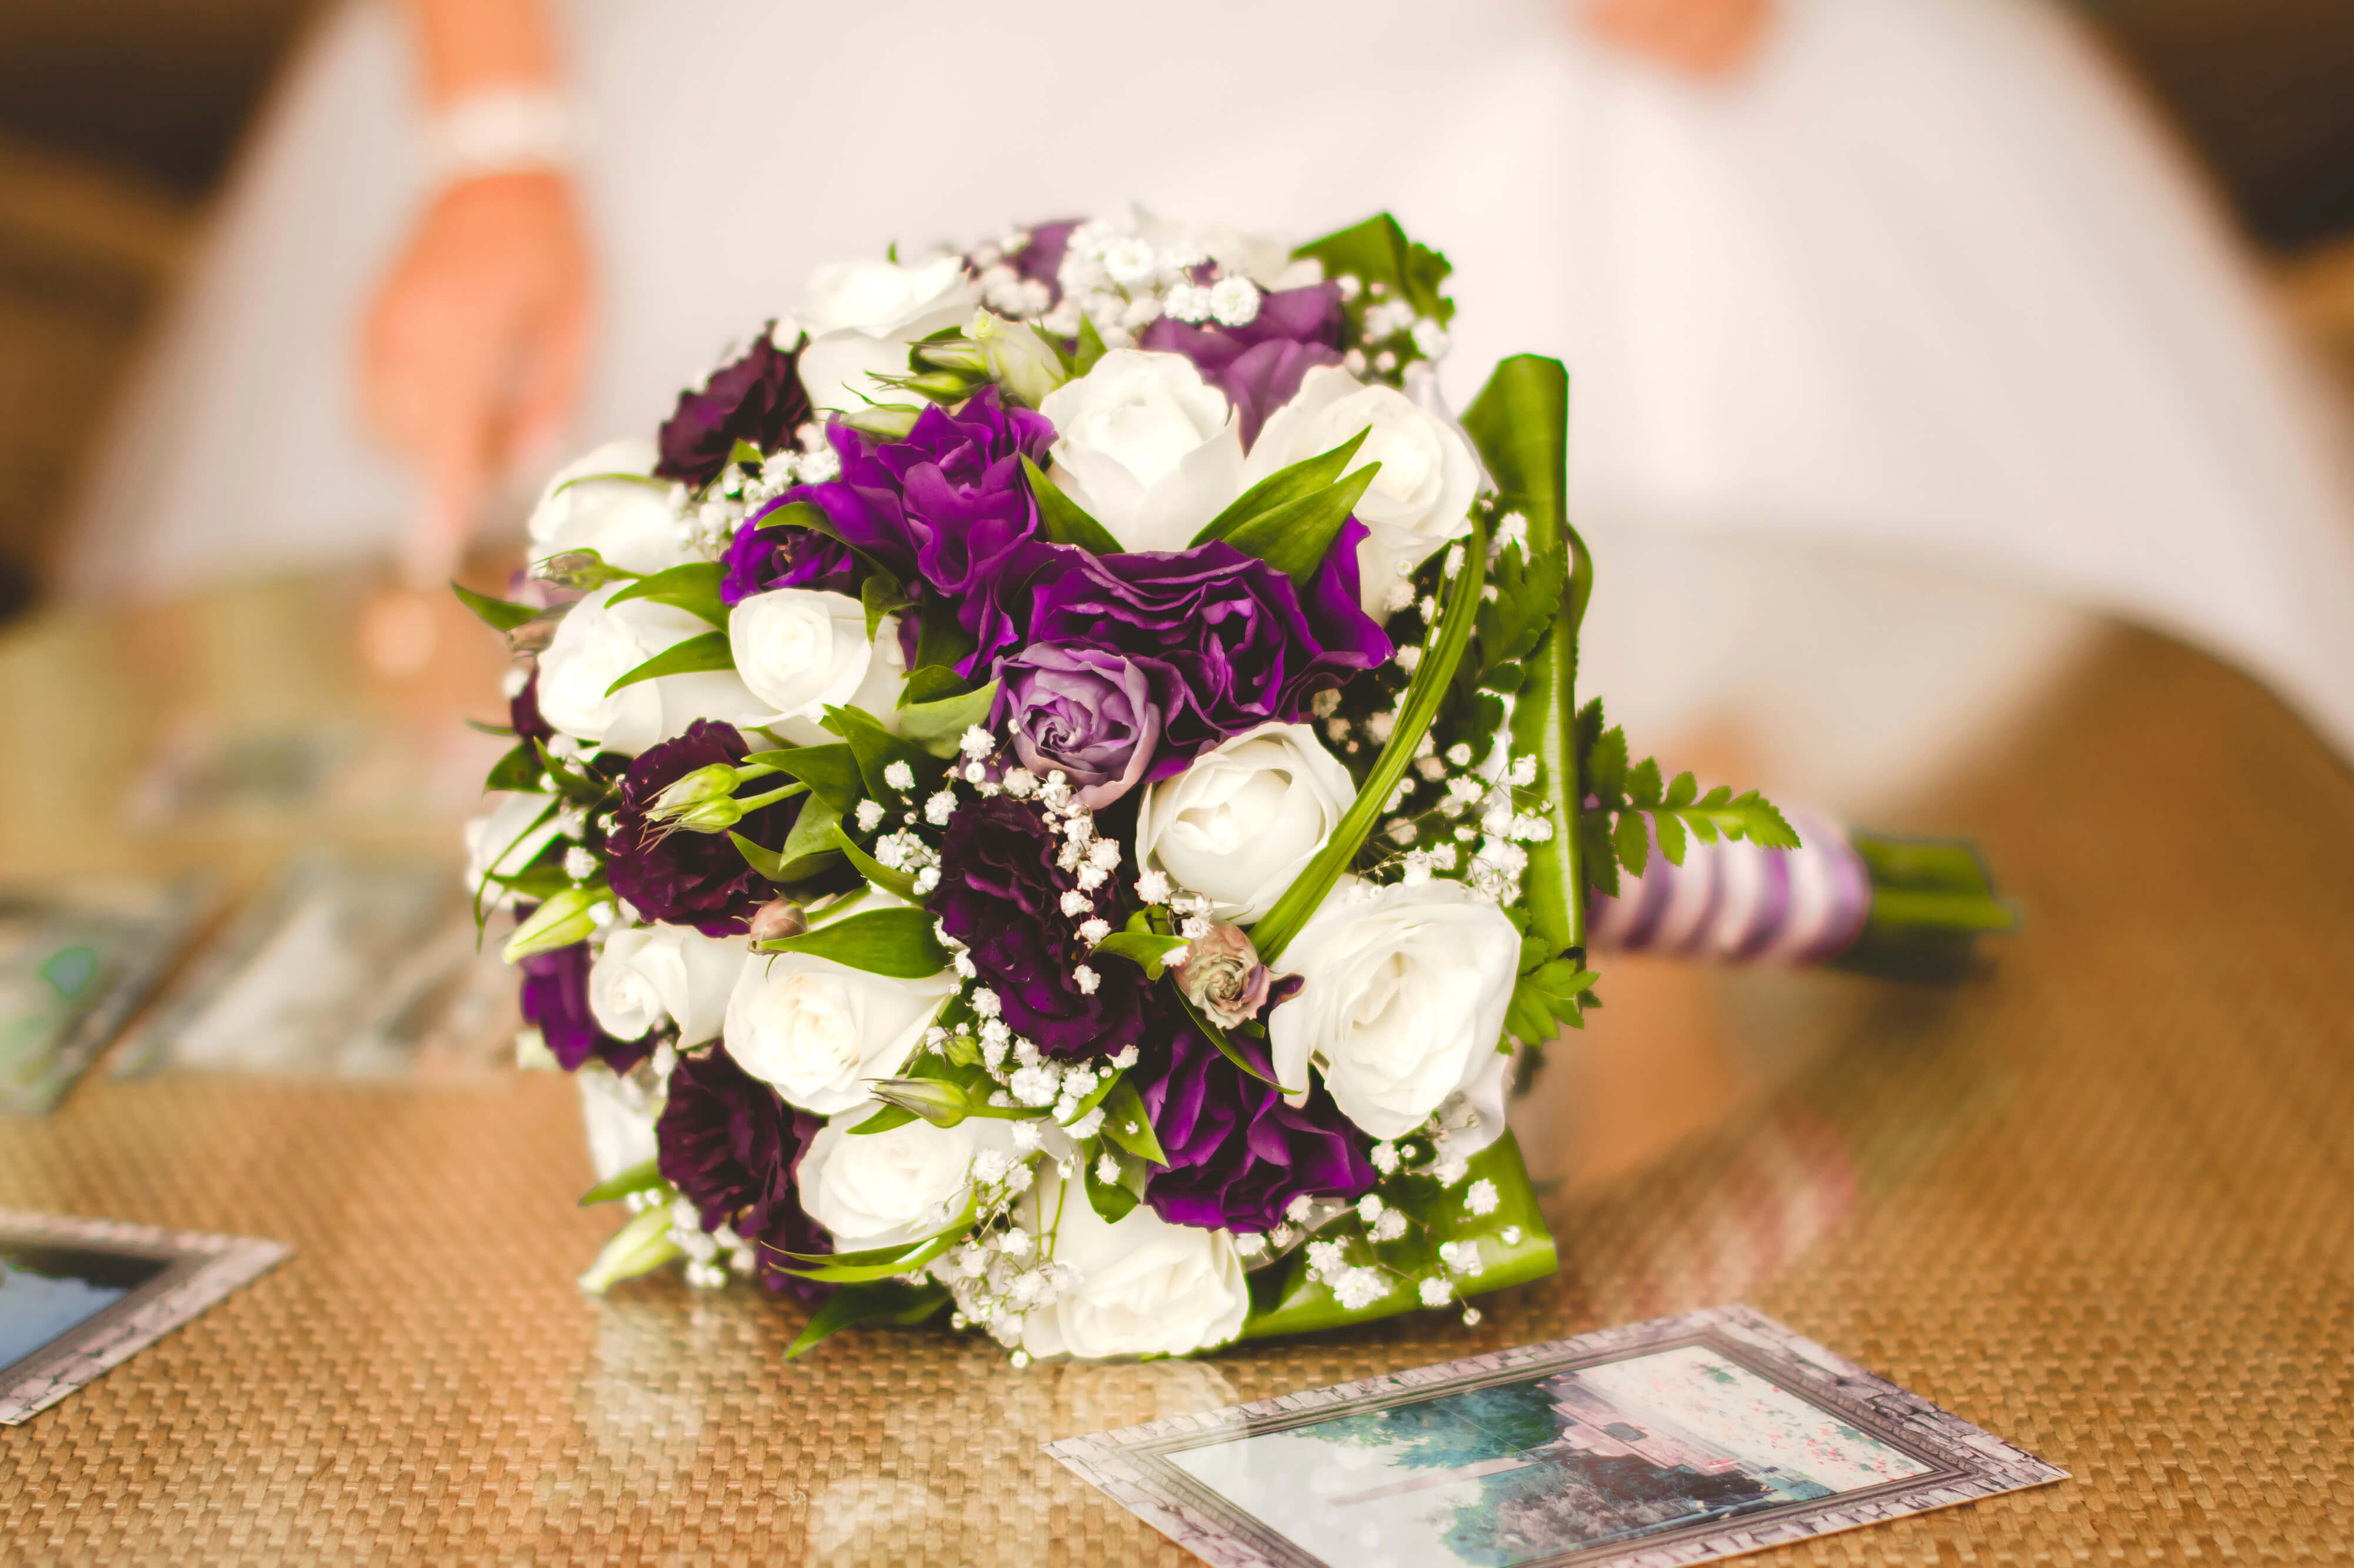 Counting Down The Most Popular Wedding Flowers of 2015 - TerraCast Products